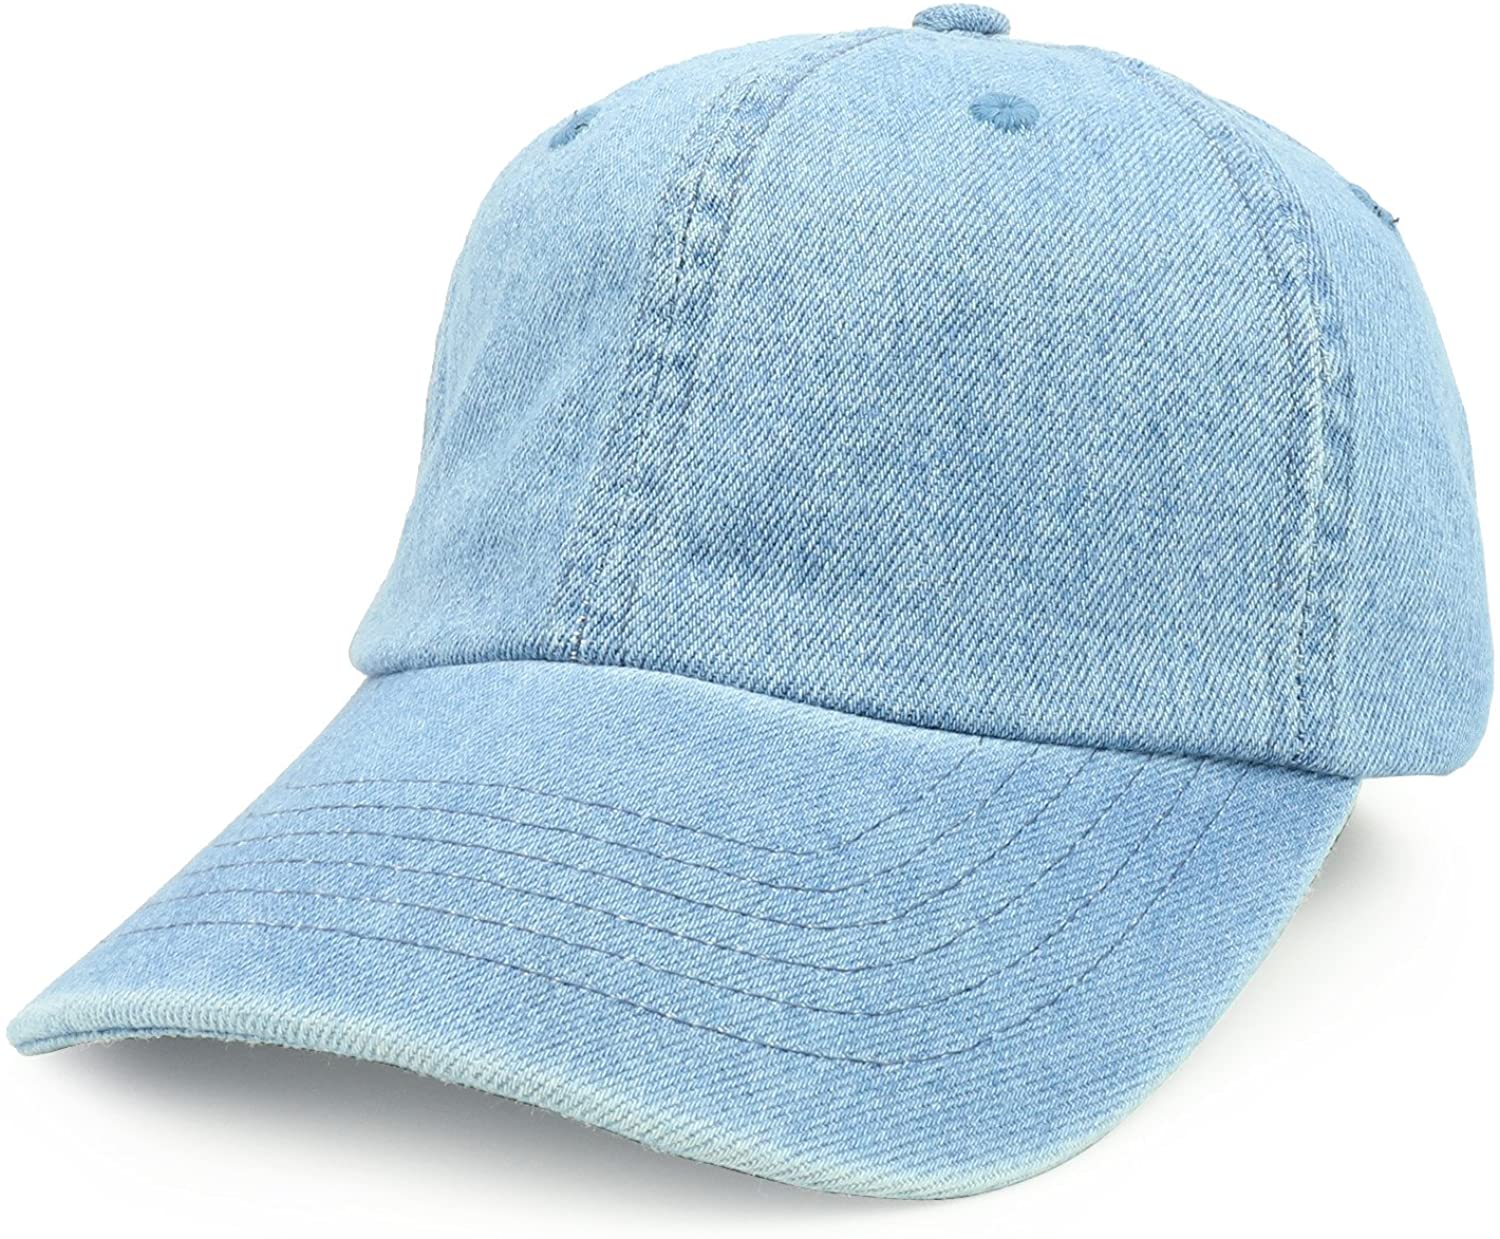 Armycrew Youth Size Kid's Low Profile Unstructured Washed Cotton Denim Cap